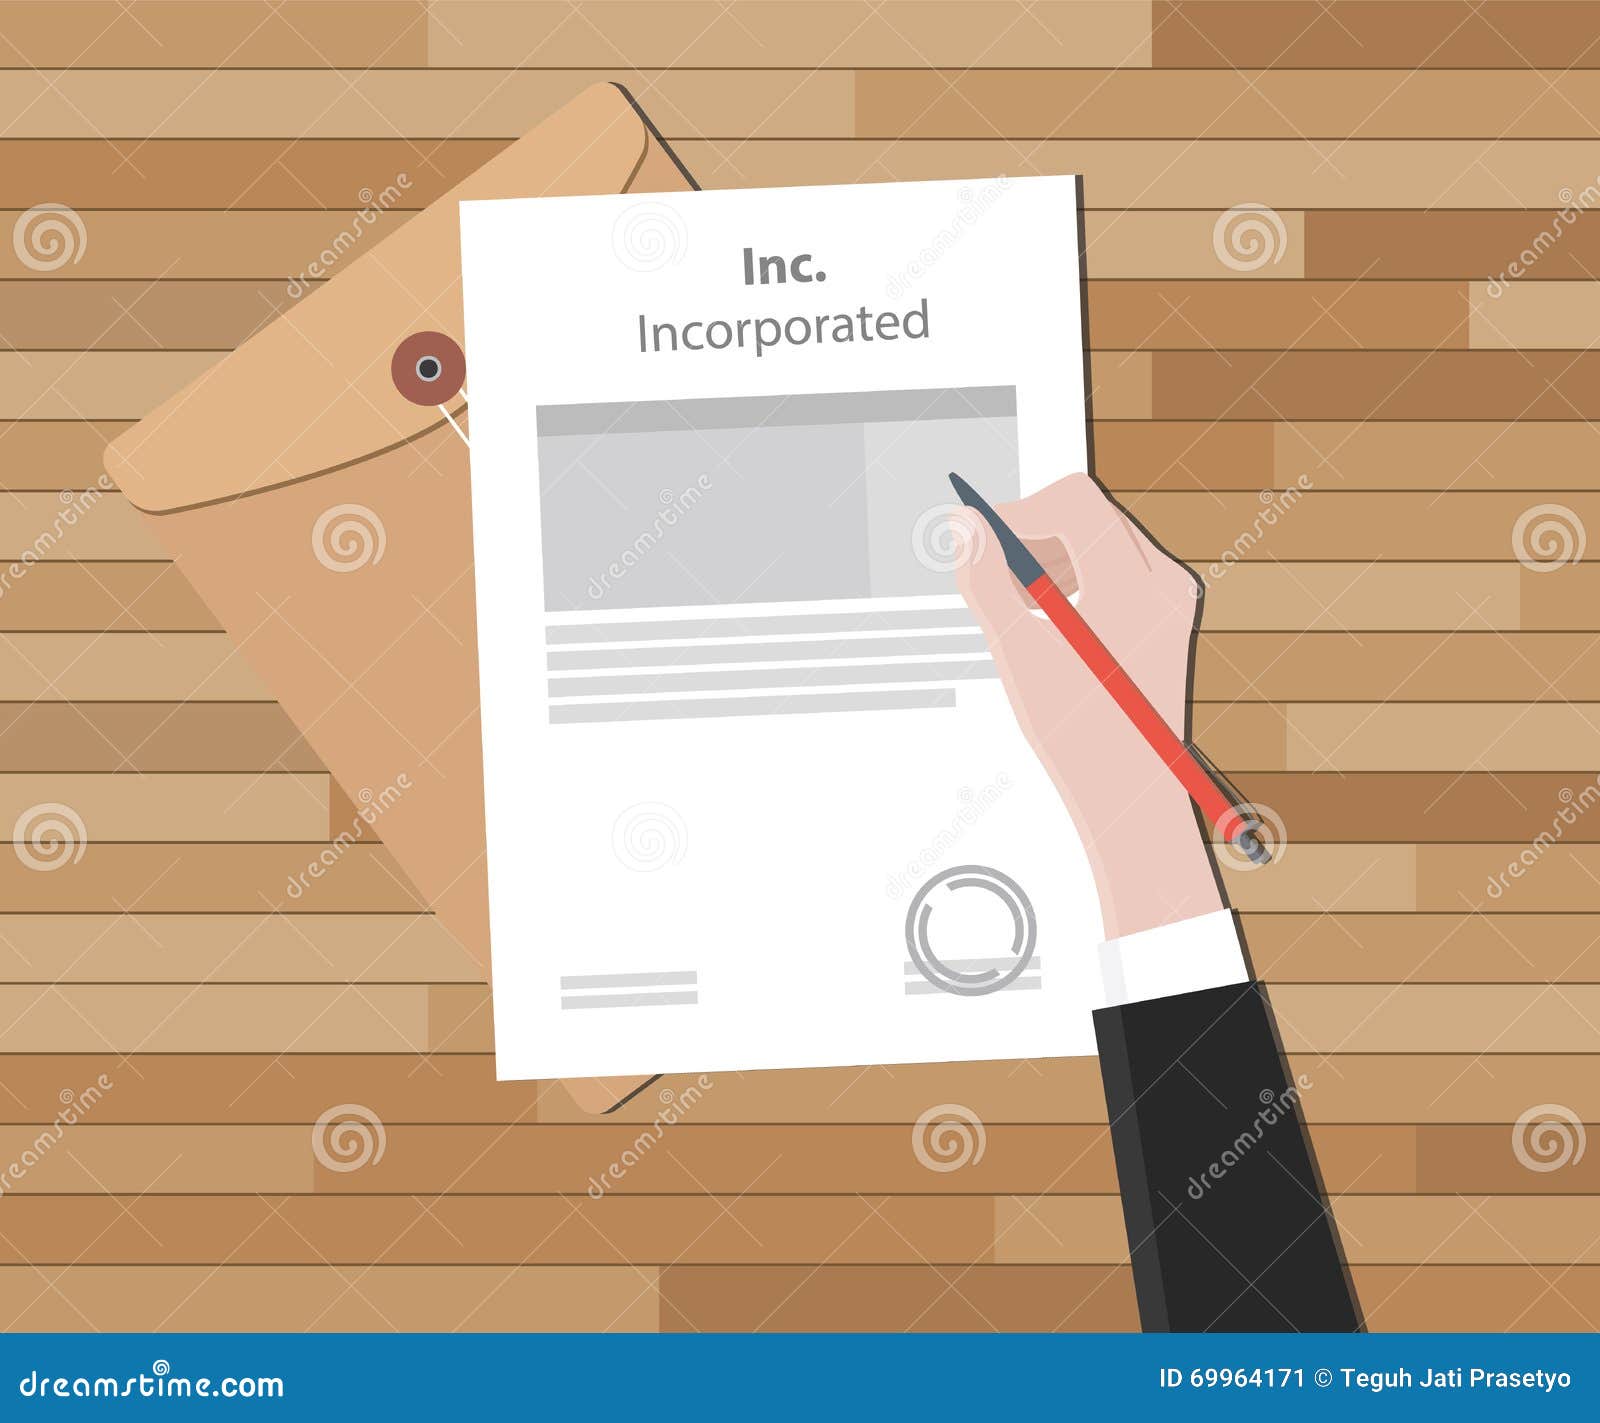 inc. incorporated incorporation company document paper